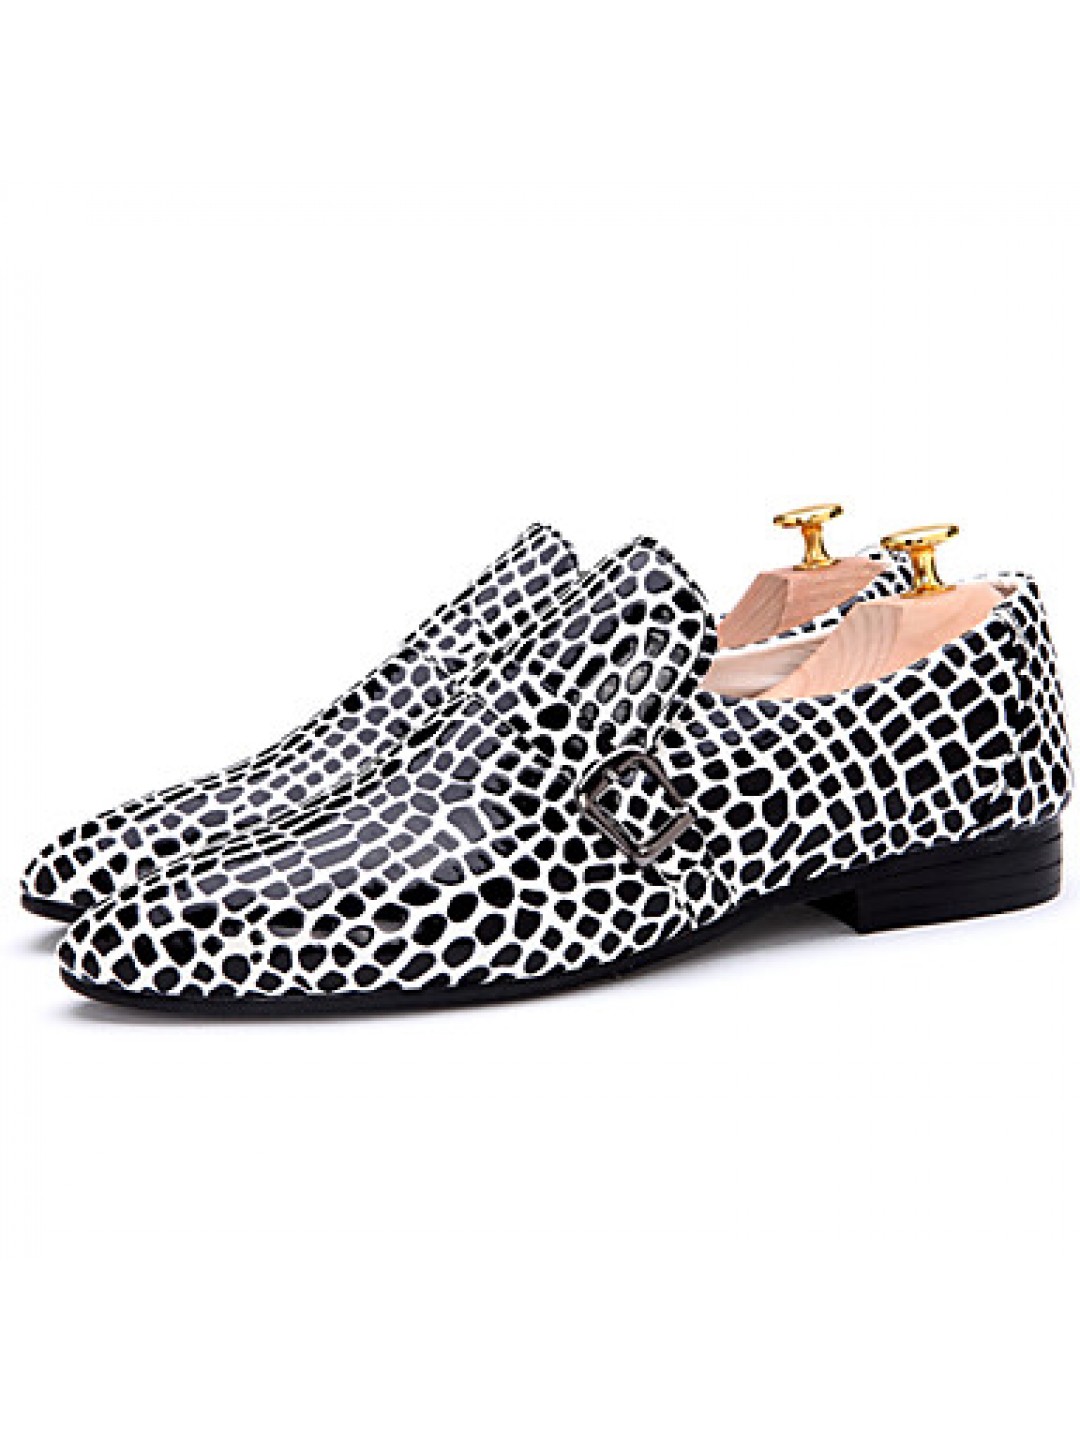 Leopard Banquets/Weddings/Parties/Nightclubs Trend Casual Leather Shoes White/Orange/Green/Bule  